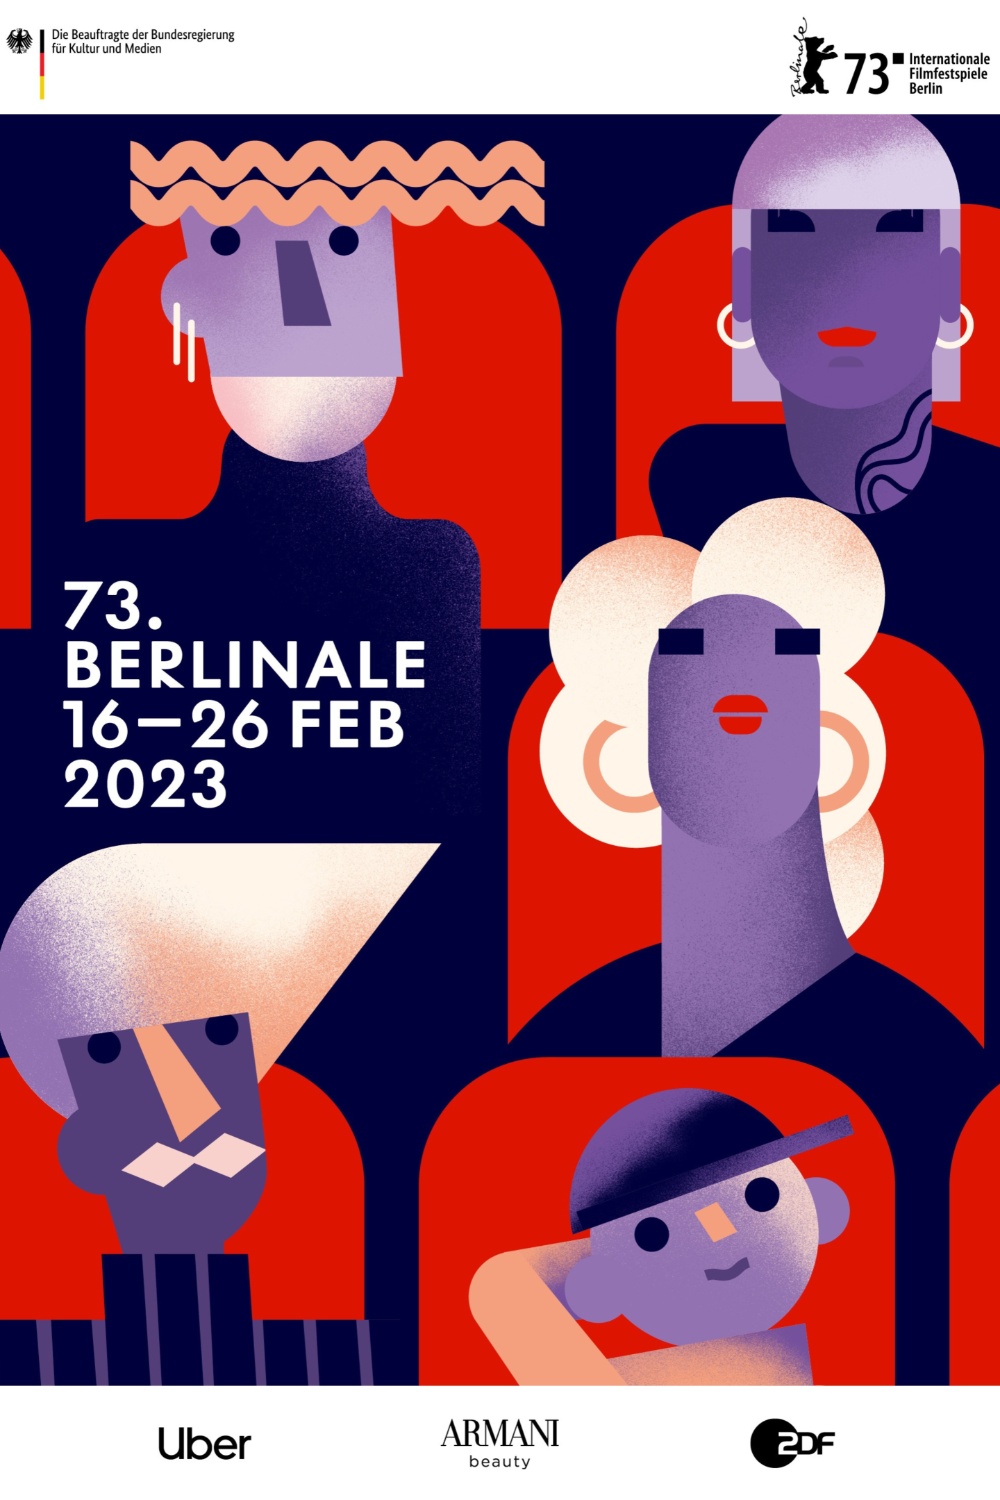 A poster of the 2023 Berlinale, a.k.a. the Berlin International Film Festival. TFV Network offers podcast coverage of this event.